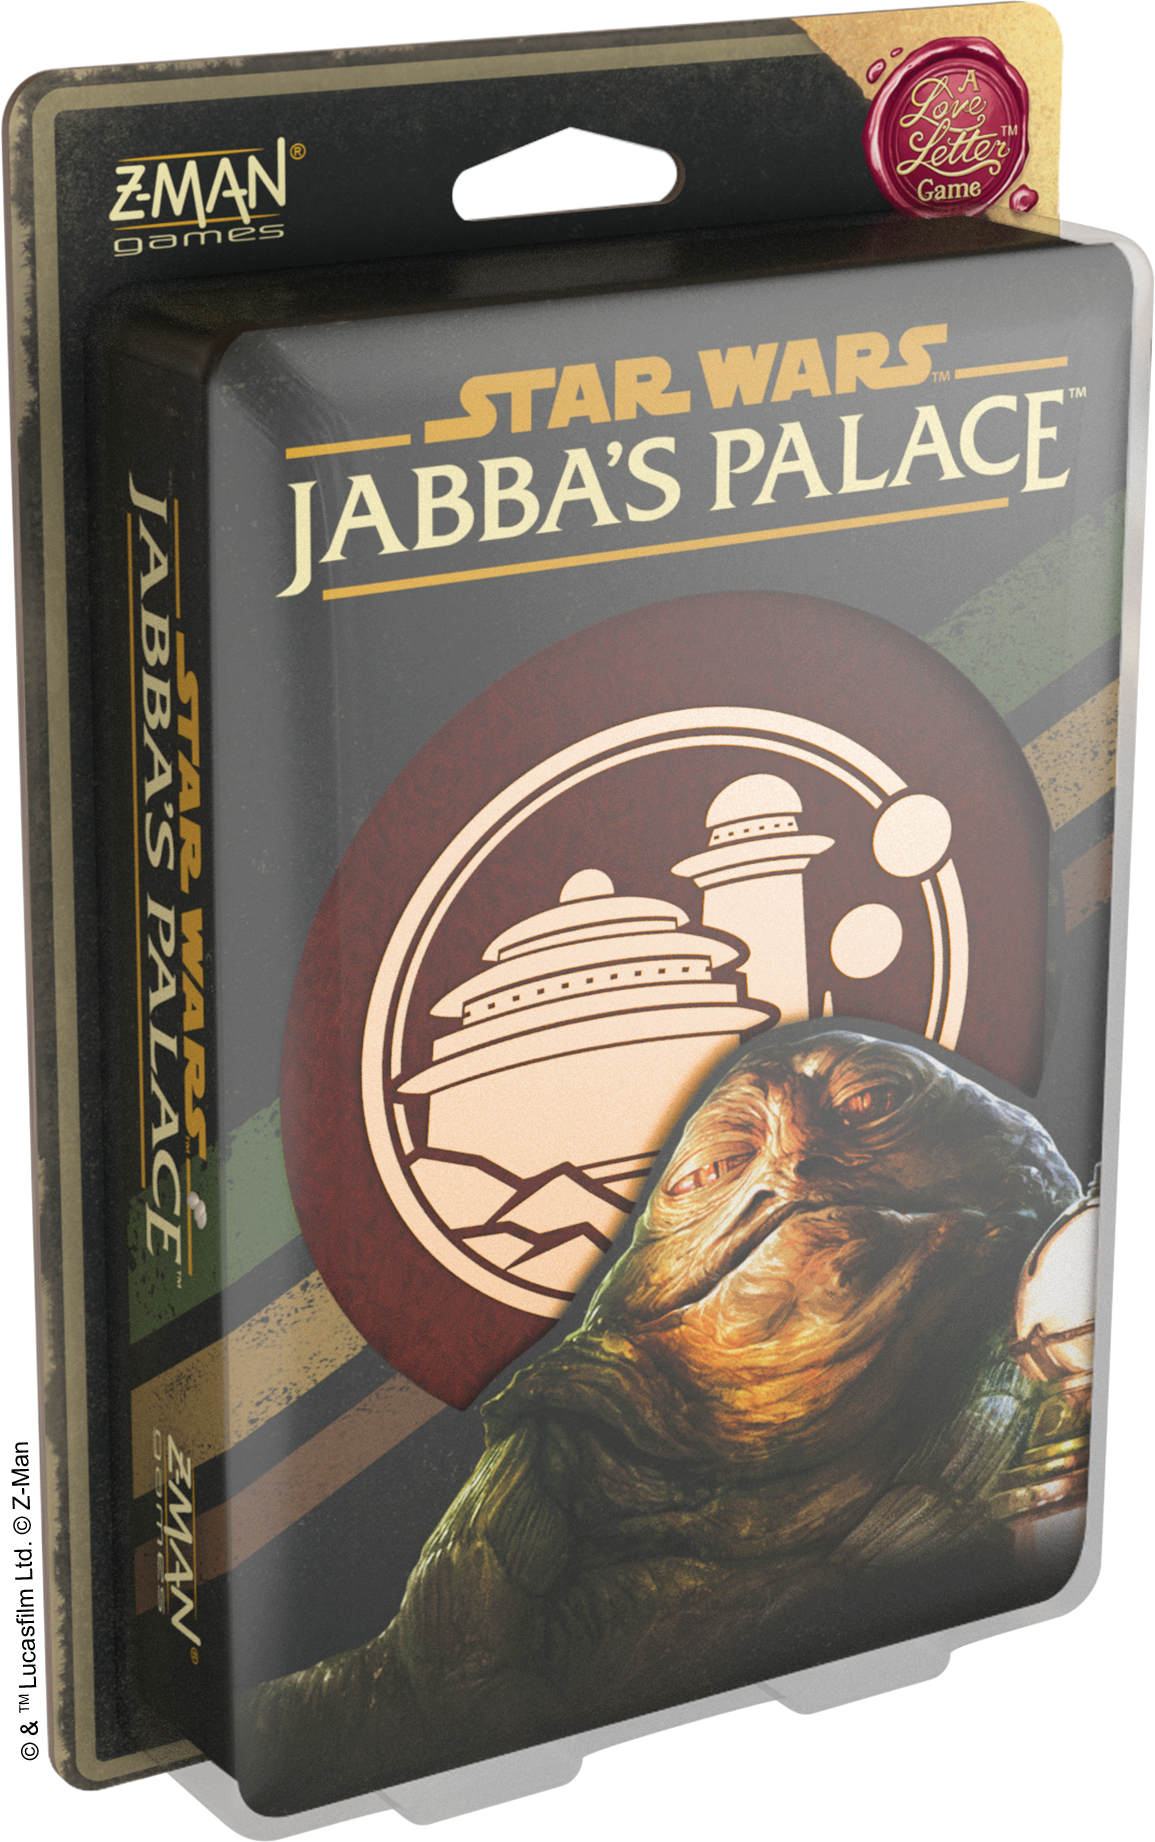 Star Wars Jabba's Palace: A Love Letter Game - Loaded Dice Barry Vale of Glamorgan CF64 3HD